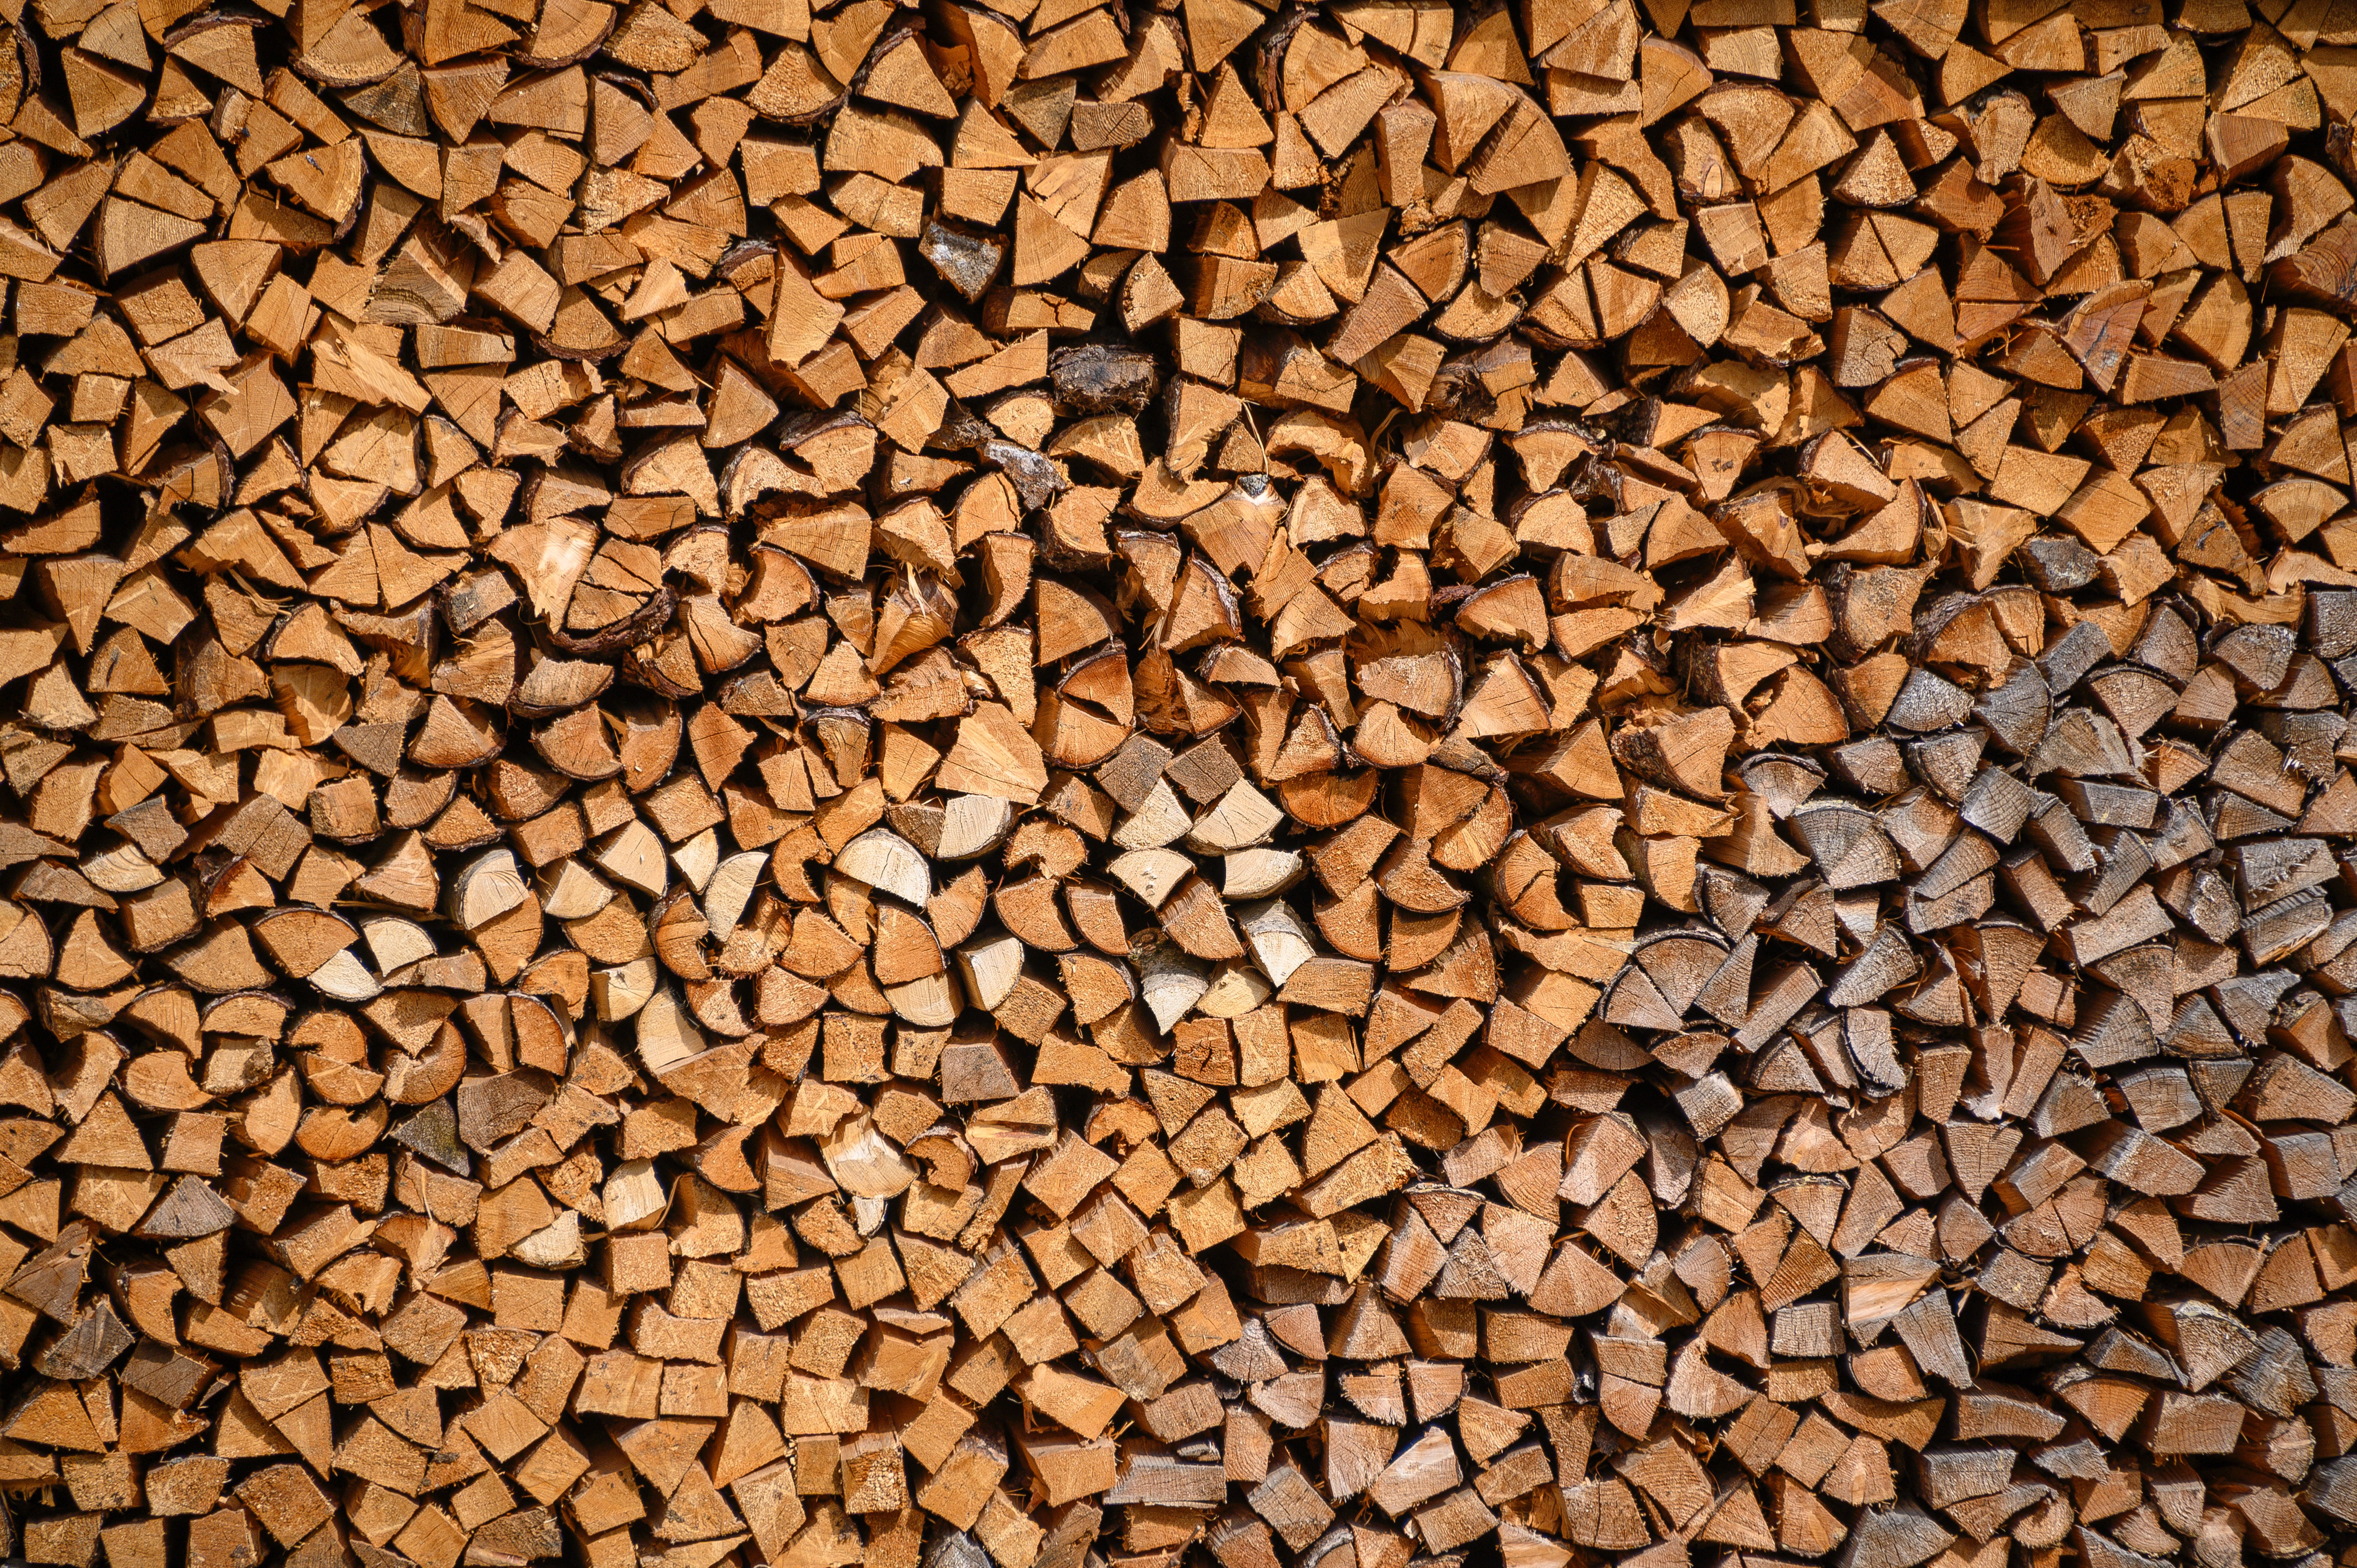 Production of wood for energy in Räpina